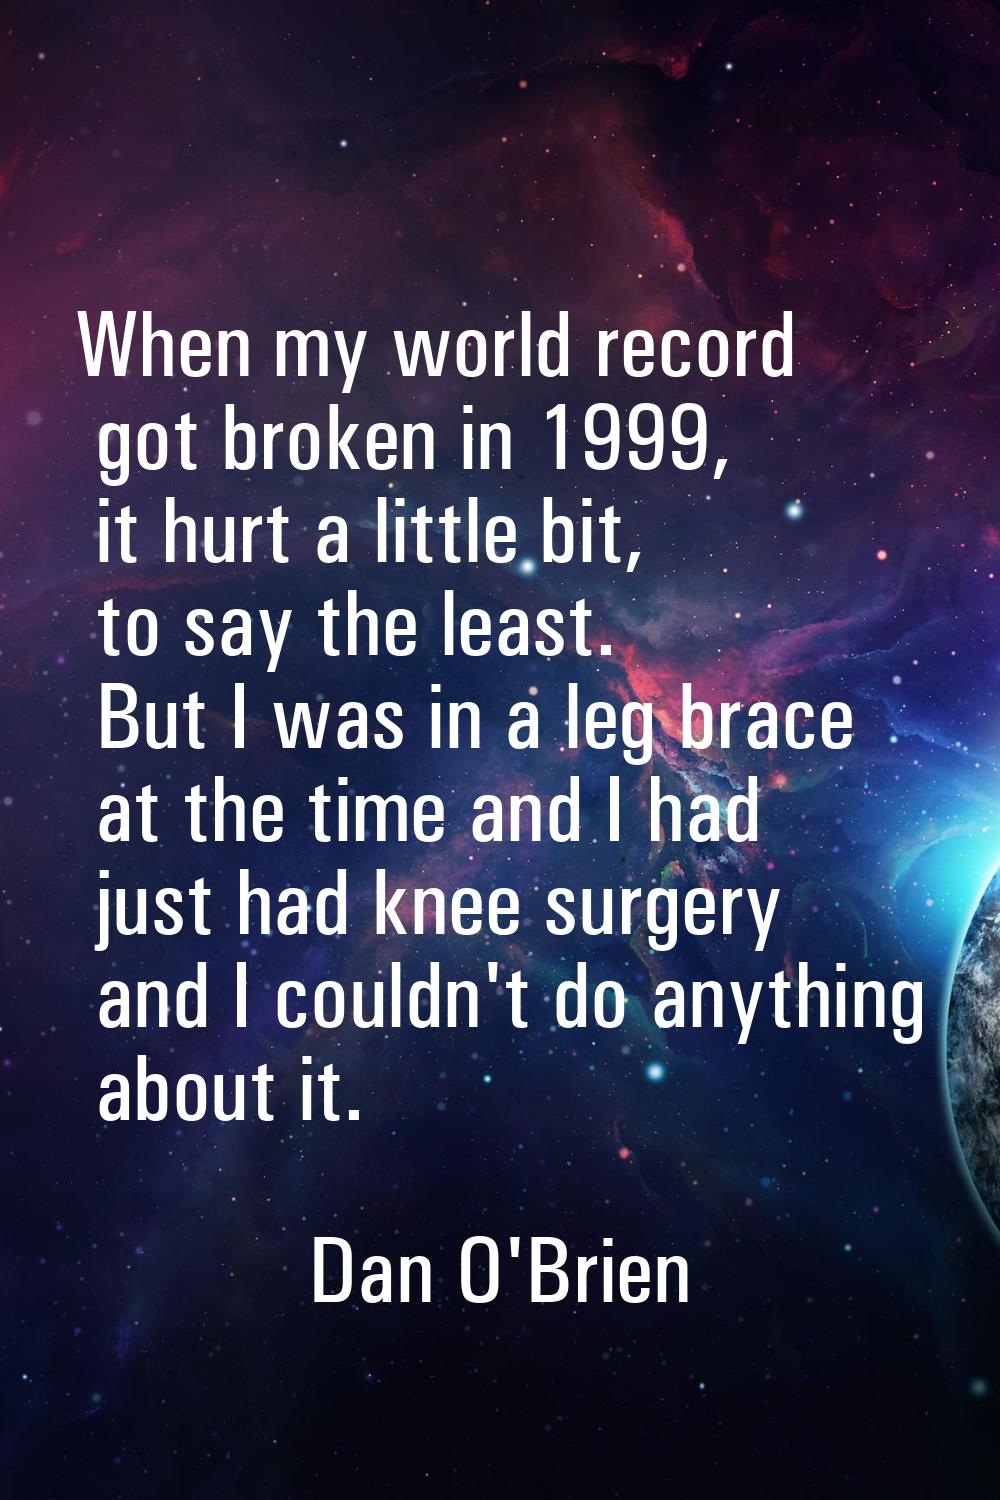 When my world record got broken in 1999, it hurt a little bit, to say the least. But I was in a leg